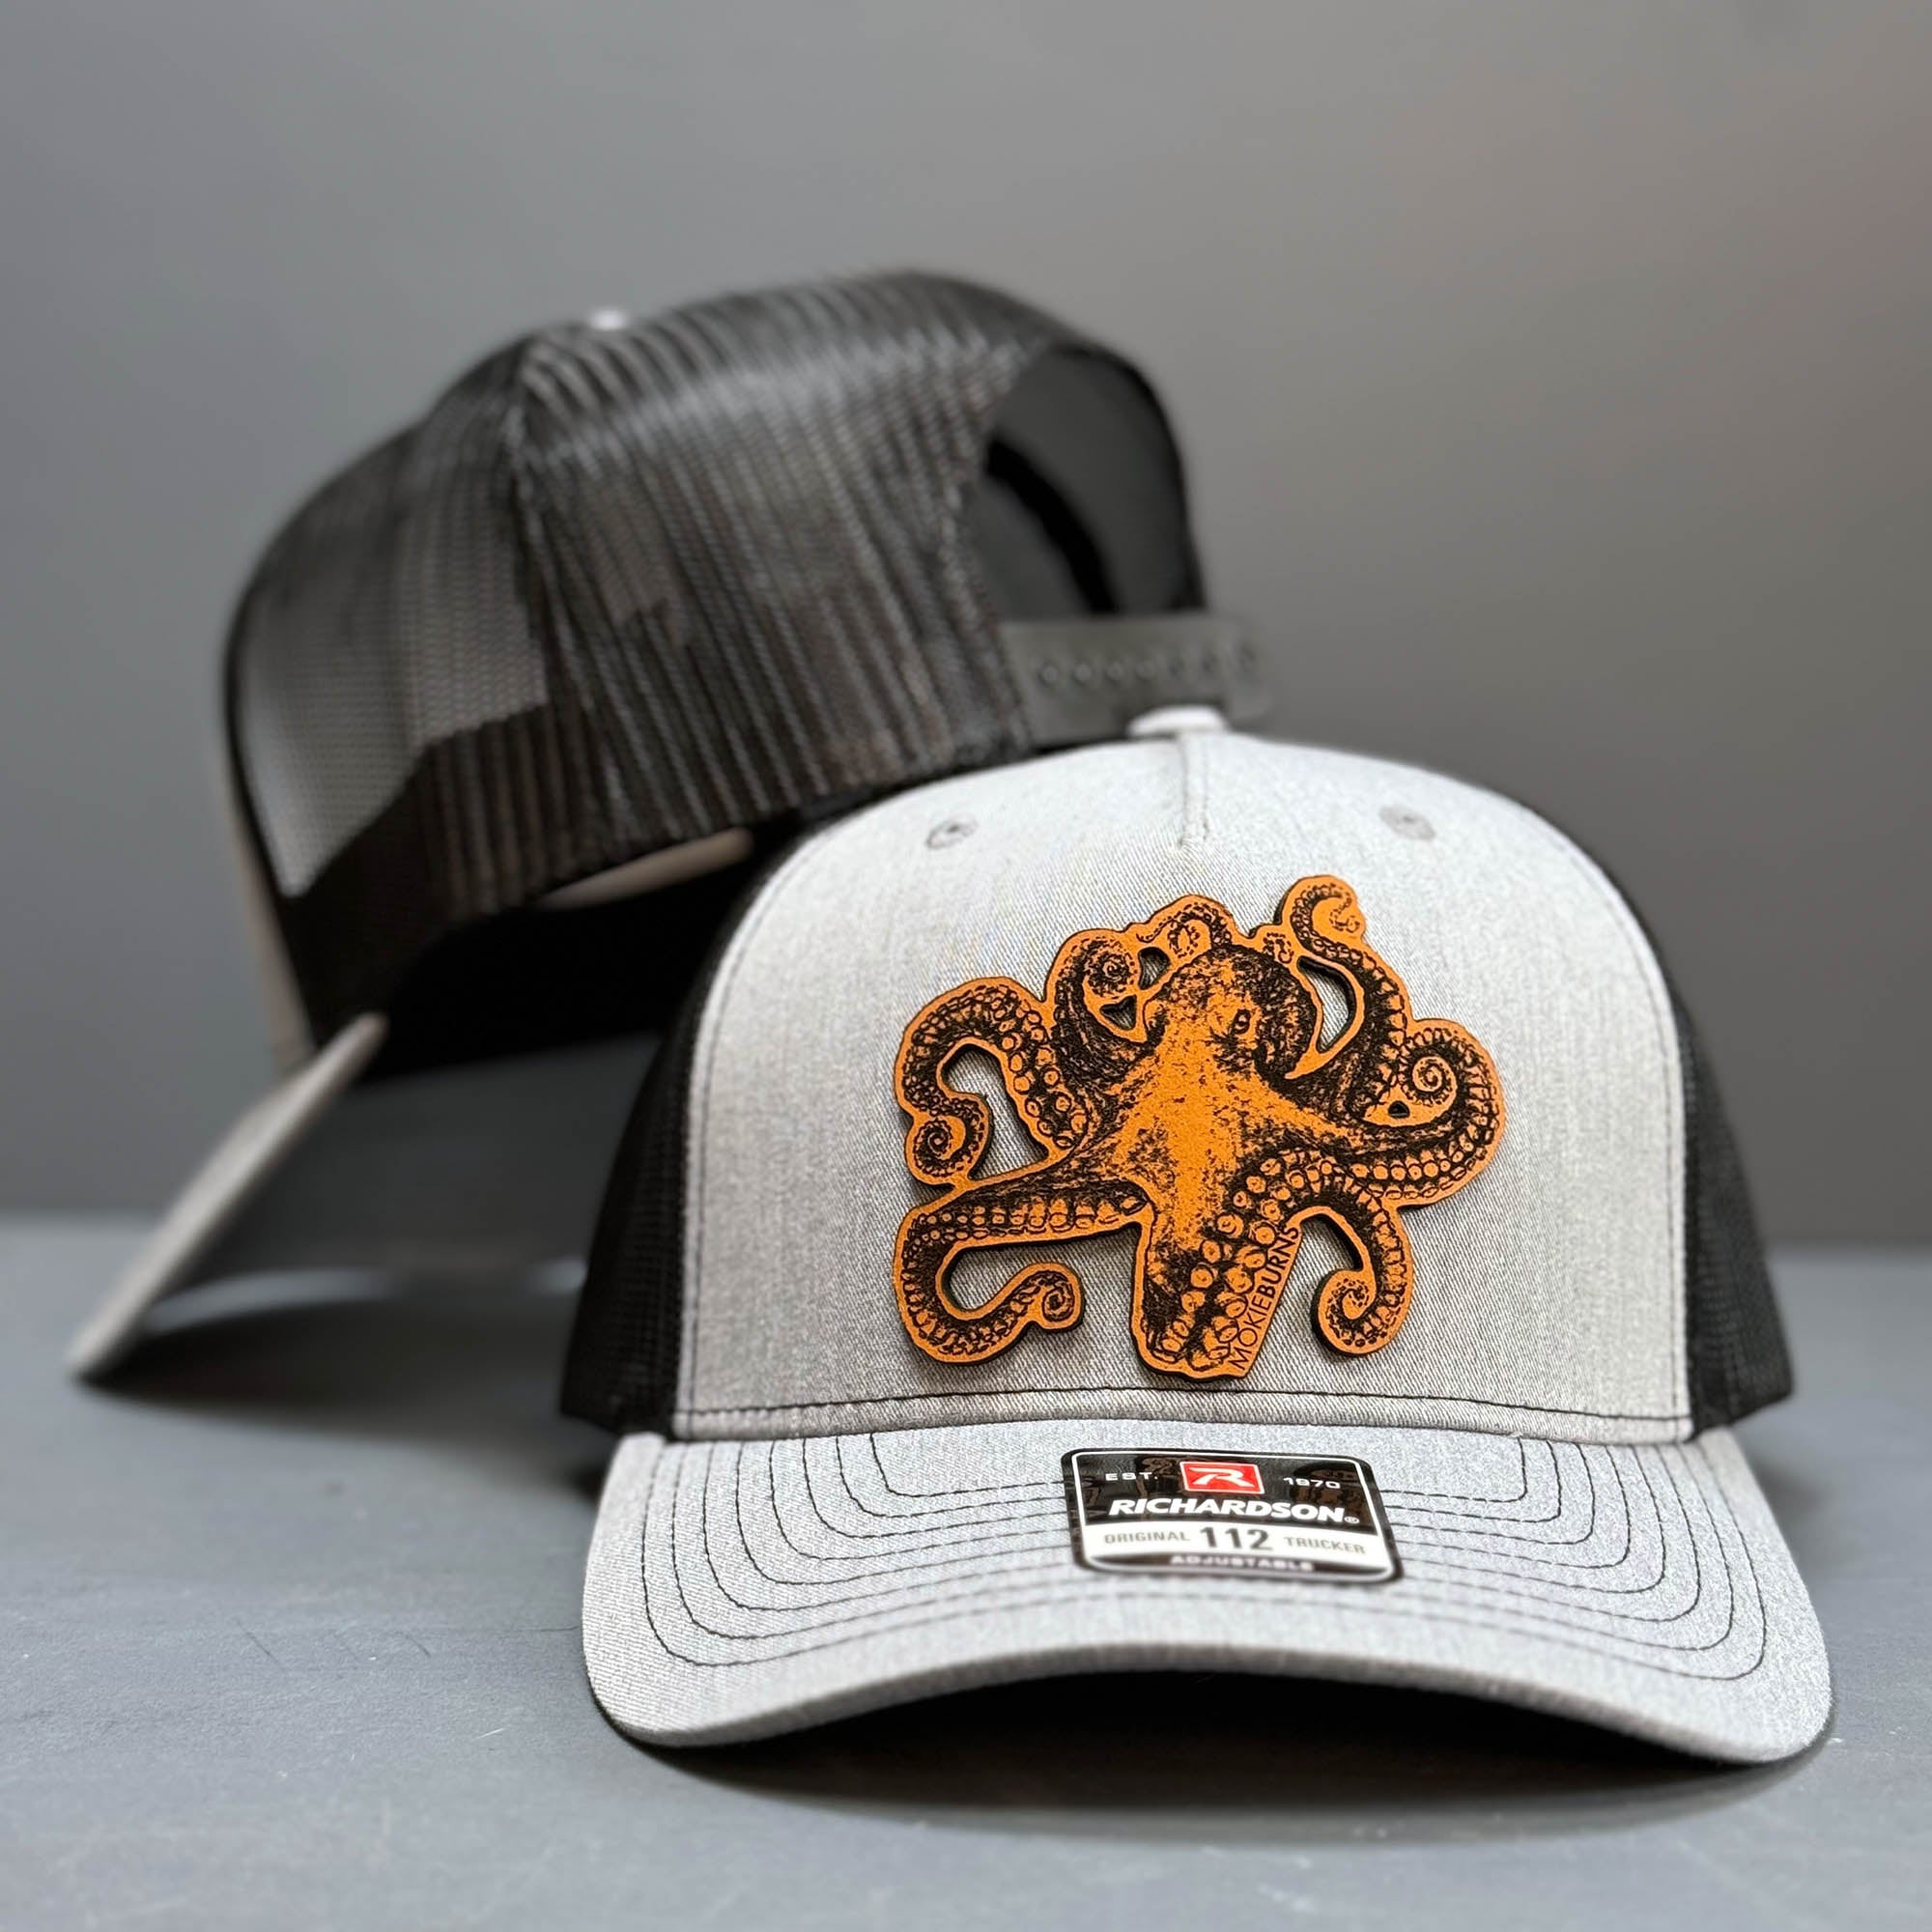 Close-up image of a Richardson 112 trucker hat in heather grey and black, featuring a striking leather patch with an octopus design, also known as 'kraken', perfect for recreational saltwater fishermen seeking a unique and marine-themed cap for their fishing outings.